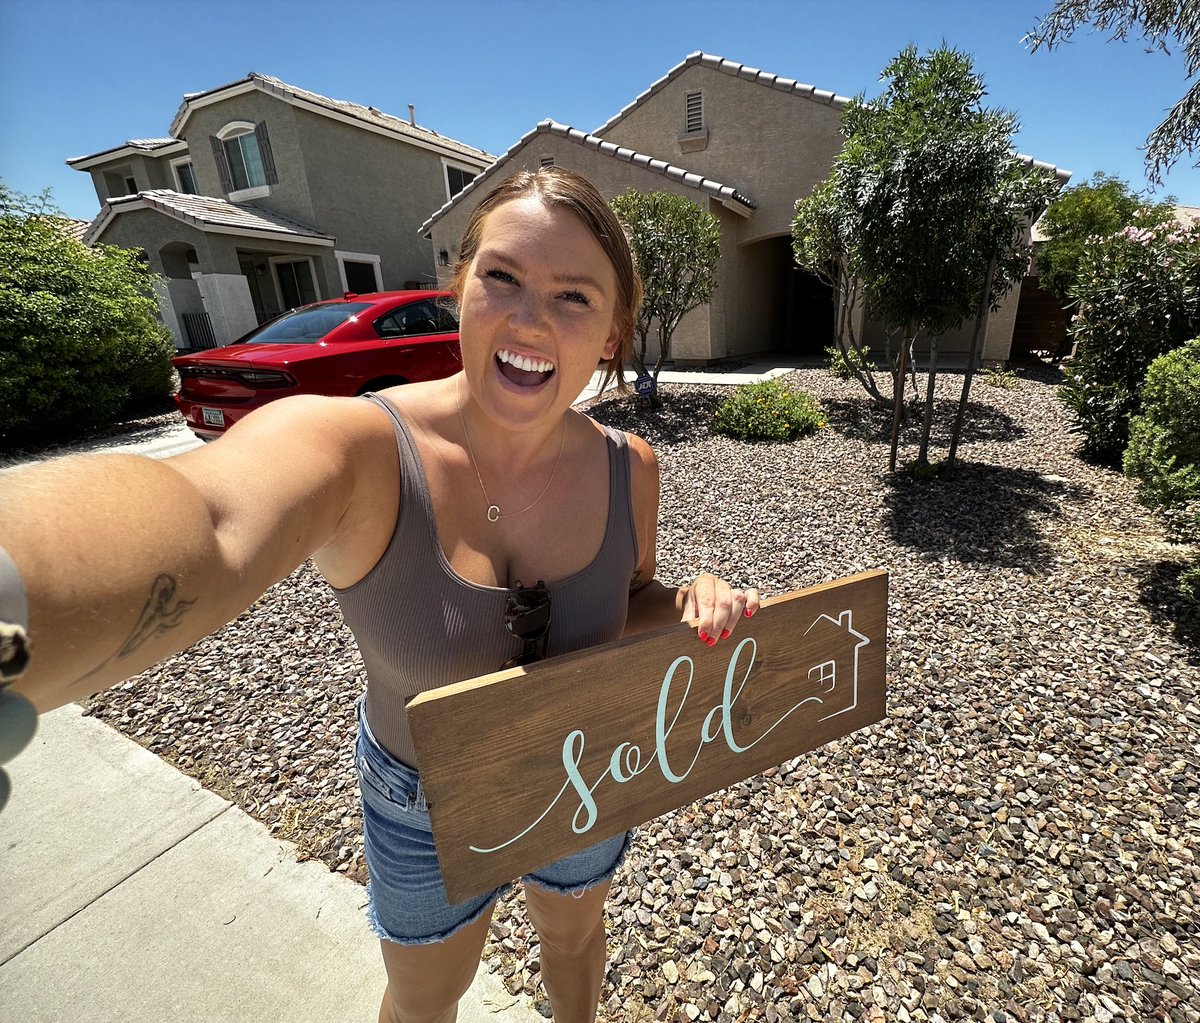 Story Time! Have you thought about Relocating? Here's some things to think about...

#soldbycarlee #arizonarealestate #relocationspecialist #Relocation #Relocationexpert #homesweethome #gilbertrealestate #gilbertrealtor

 soldbycarlee.com/blog/story-tim…